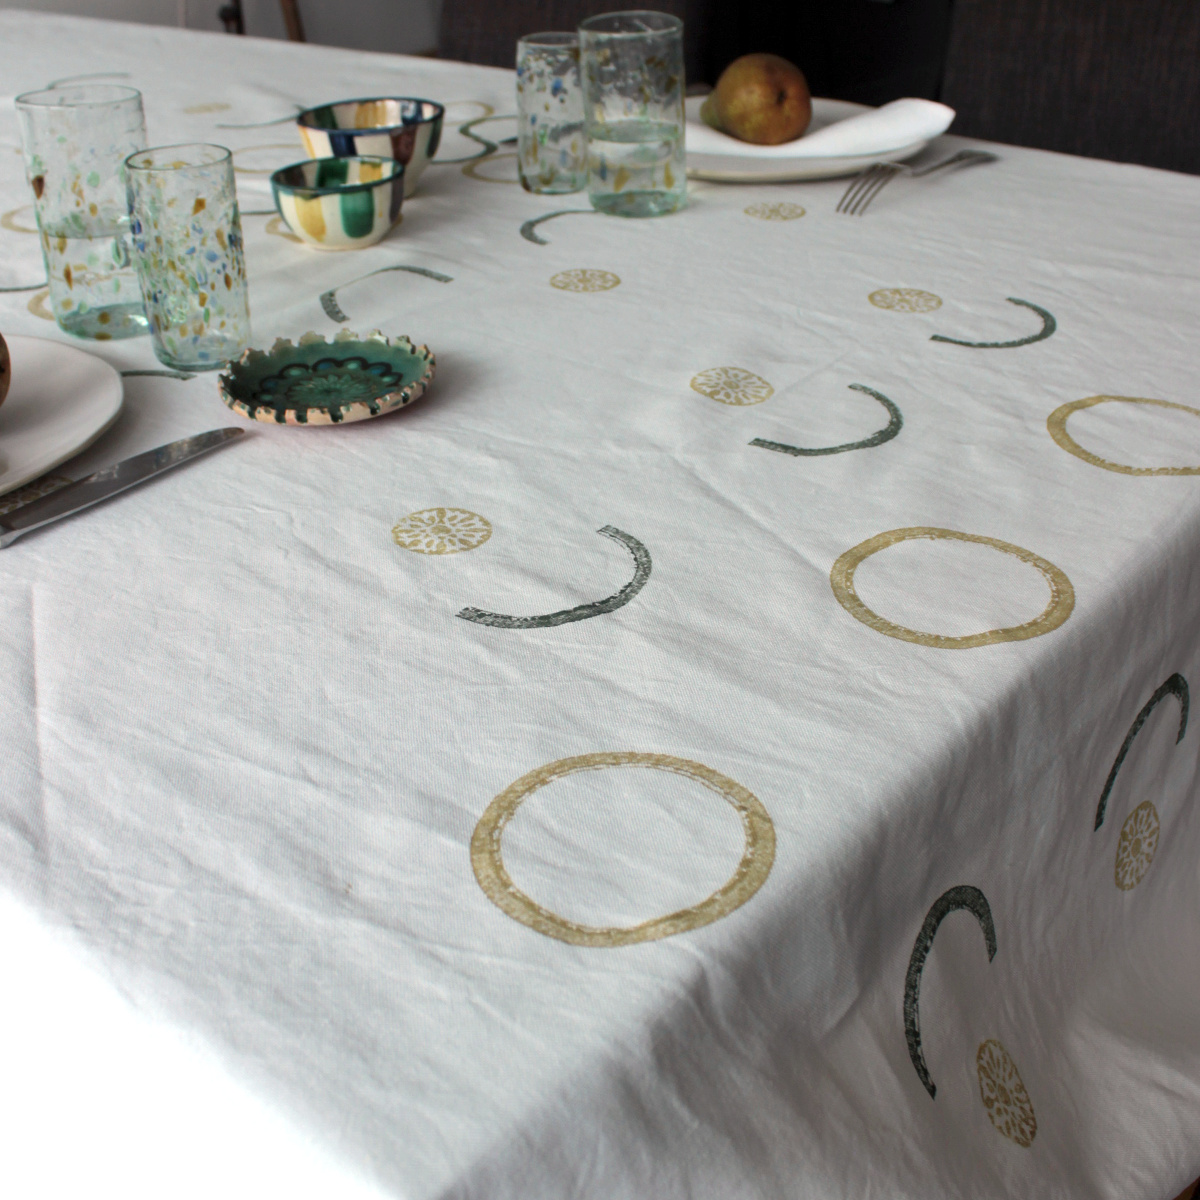 Heritage-Inspired Circle Printed Tablecloth: A Sustainable Addition to Your Table Setting